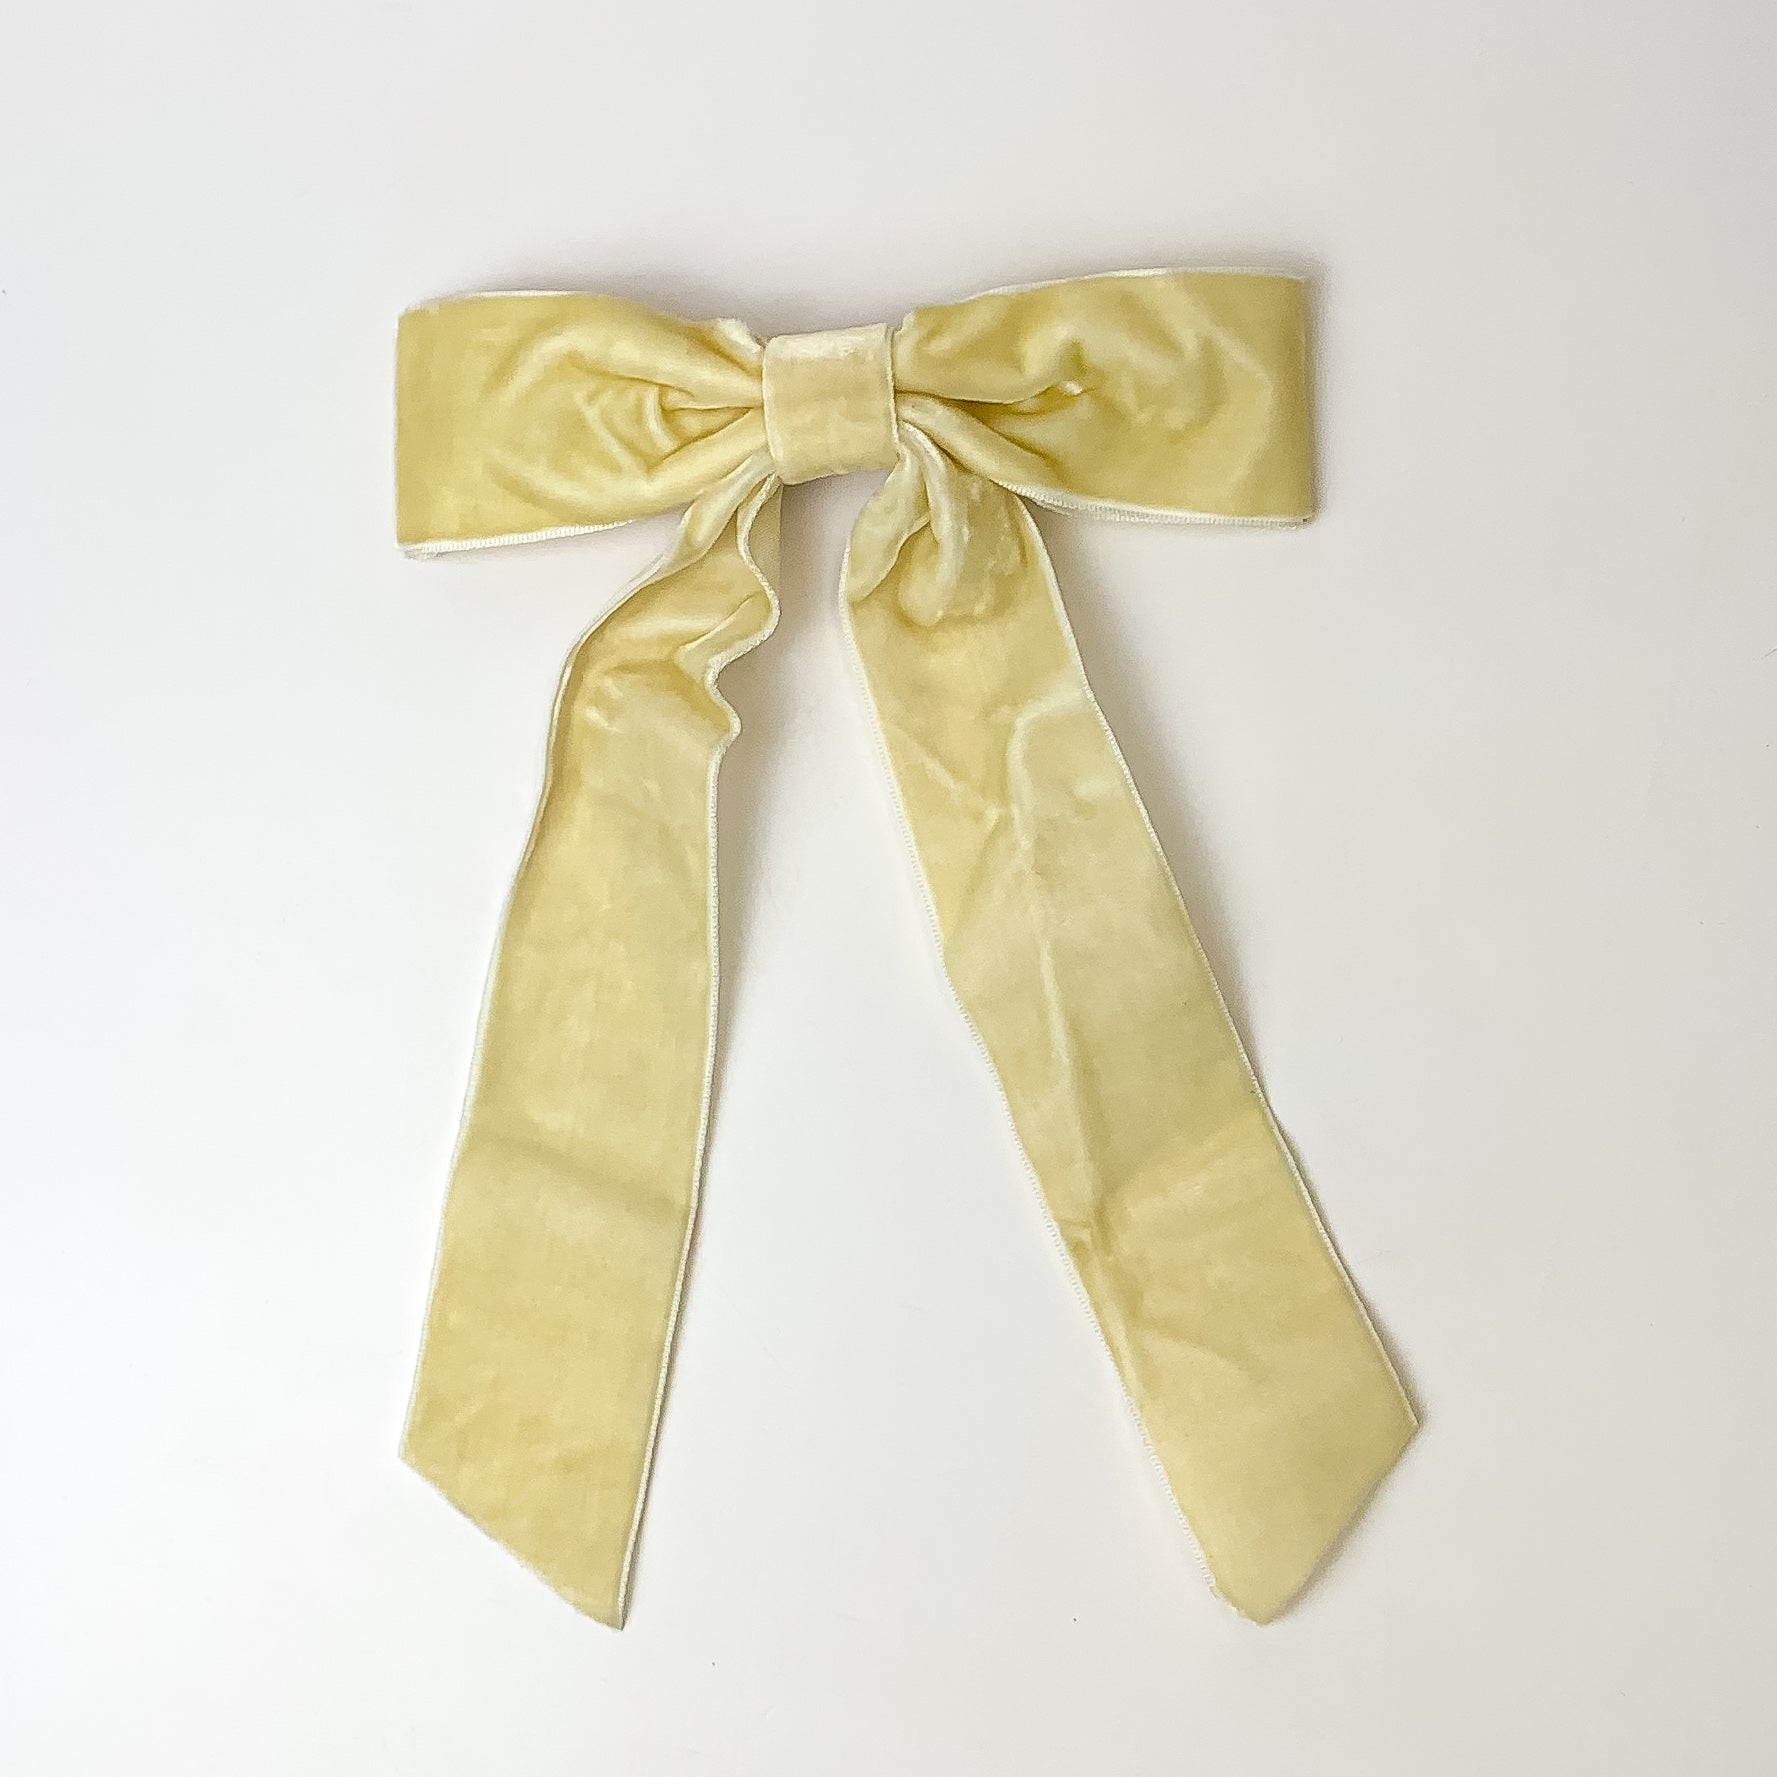 This beautiful cream bow is taken with a white background.